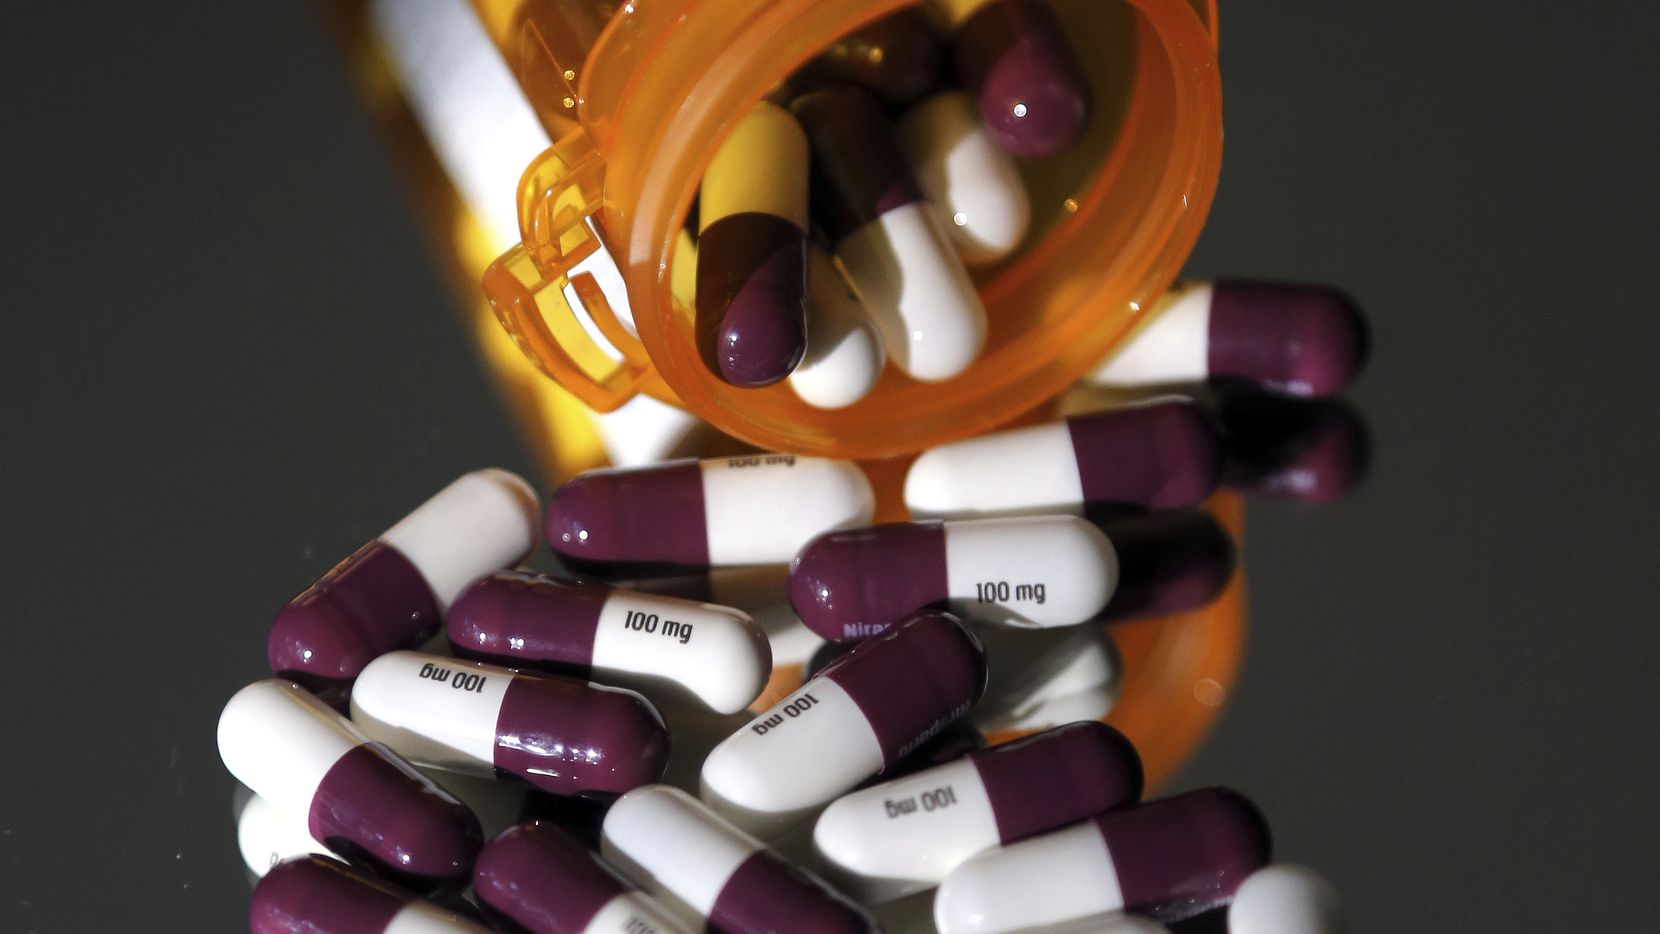 Irving residents can drop off unwanted prescription drugs Saturday as part of National...